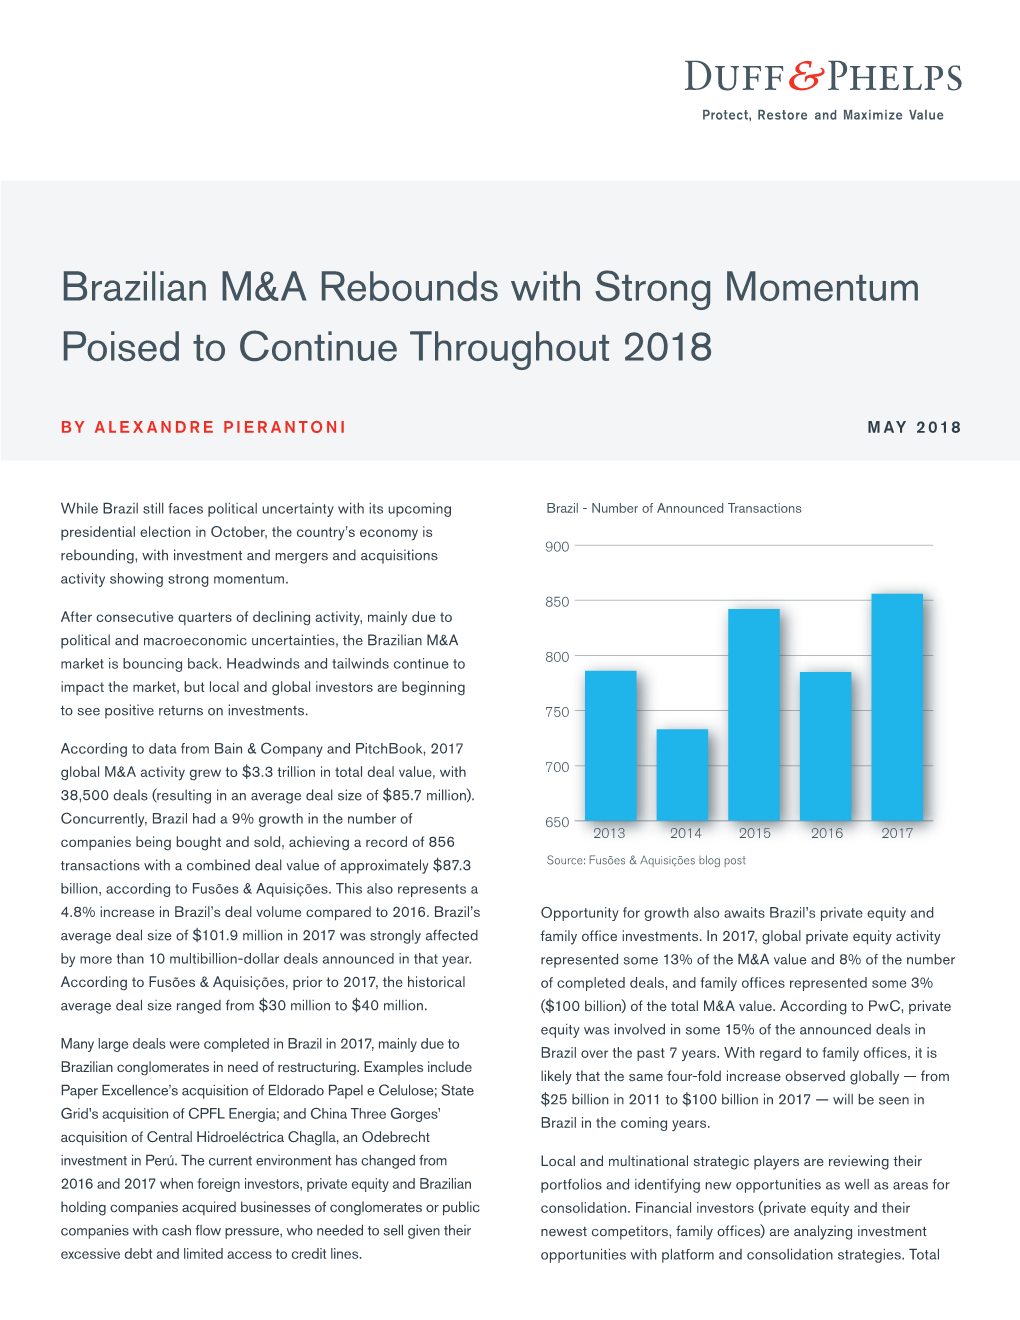 Brazilian M&A Rebounds with Strong Momentum Poised to Continue